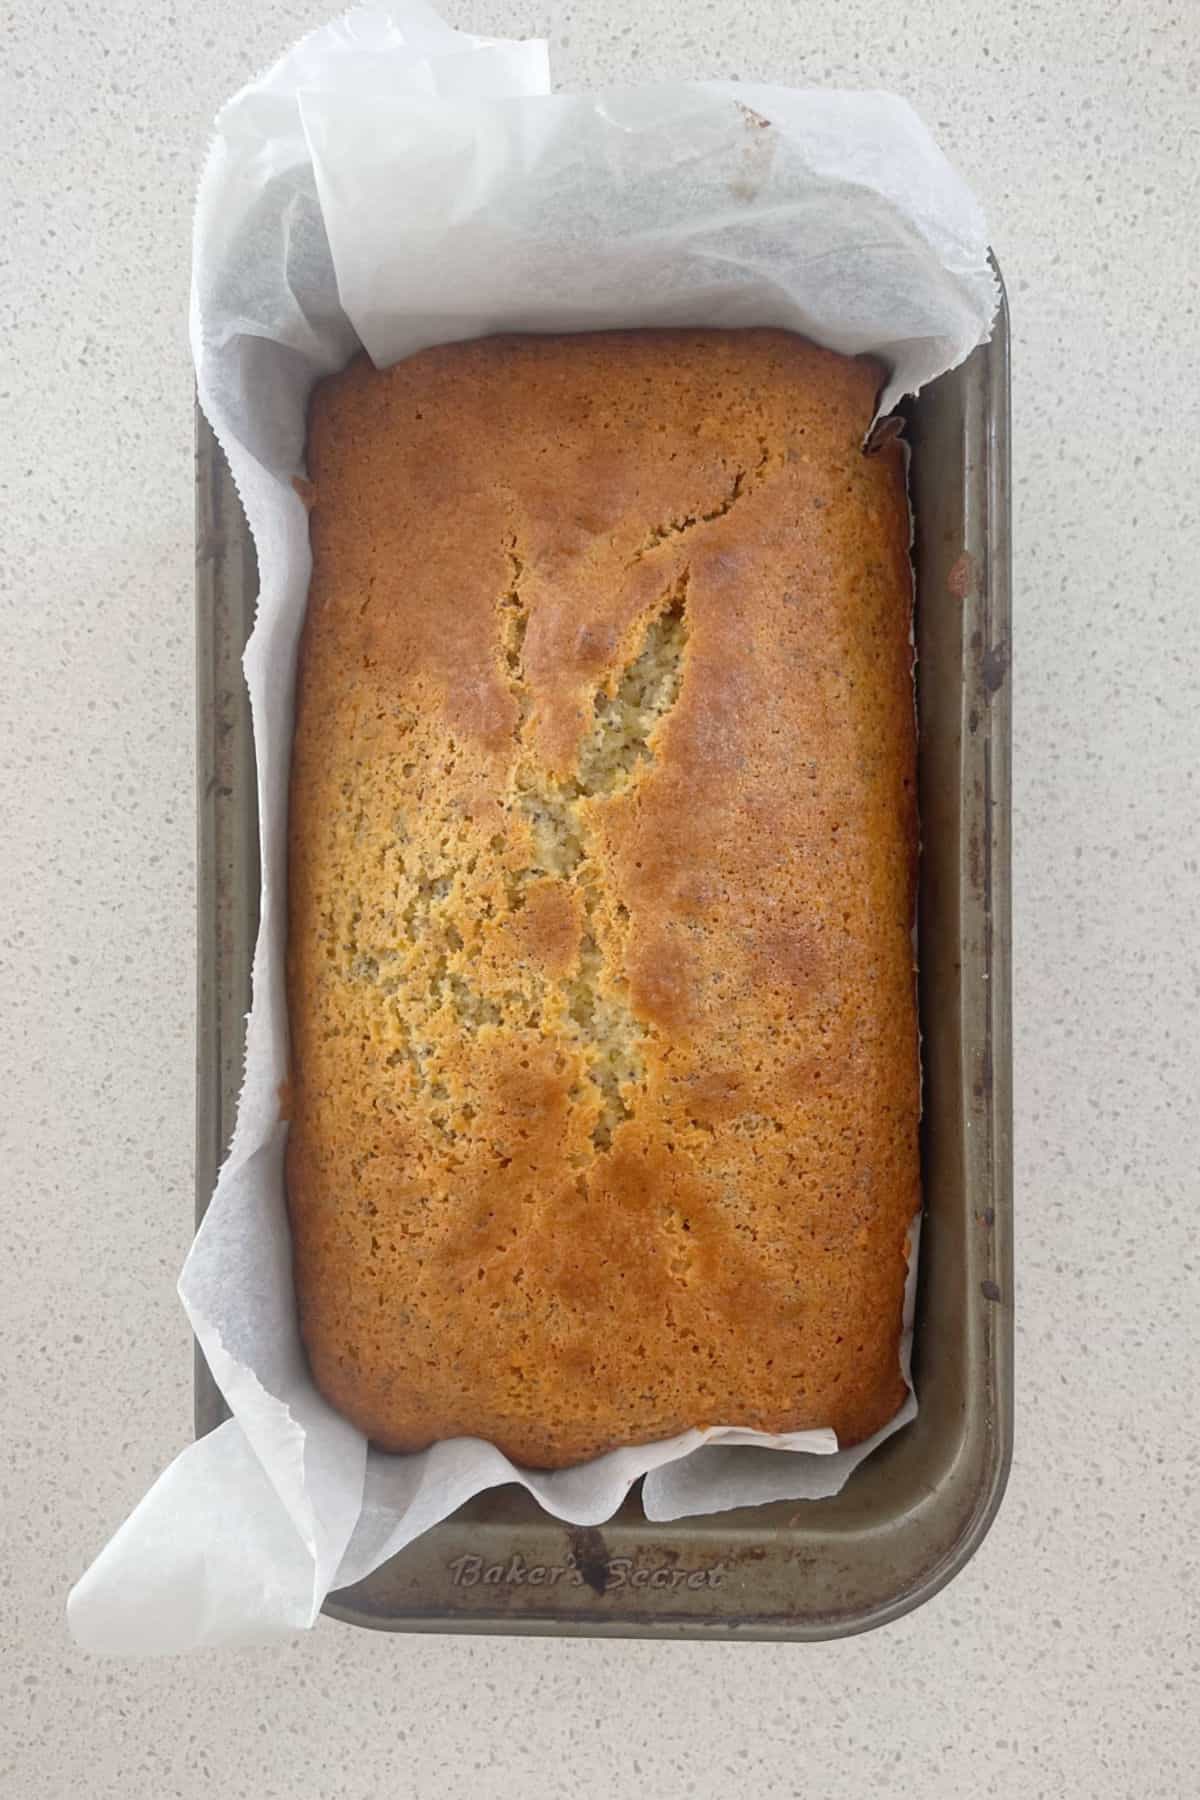 Lemon and Poppy Seed Cake straight out of the oven and in baking dish.